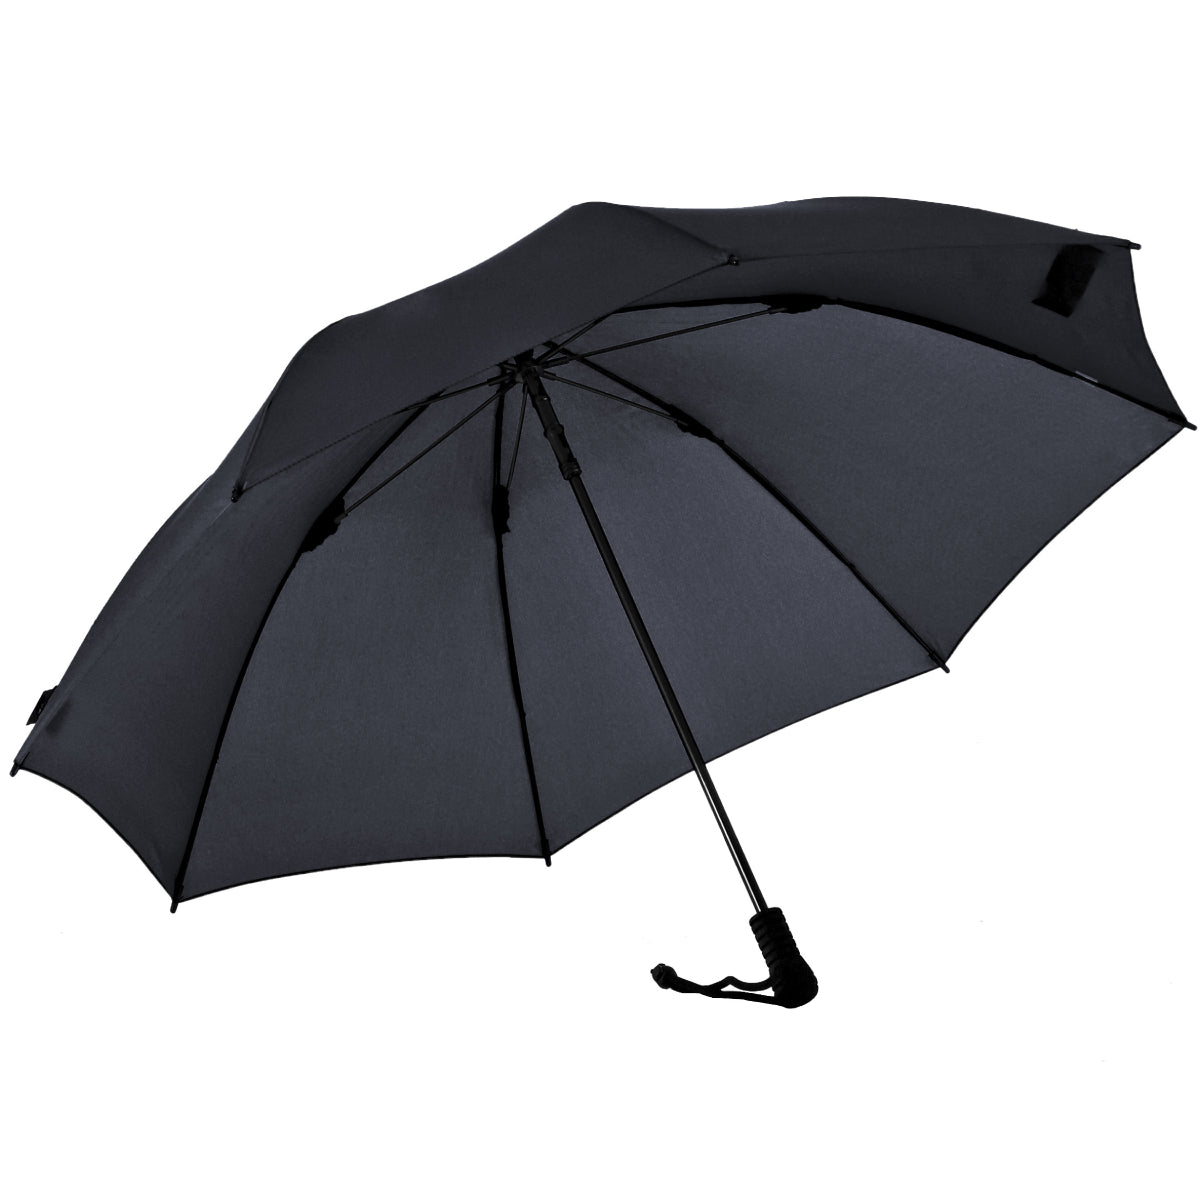 Canope Umbrella Protects Photographers, Keeps Hands Free